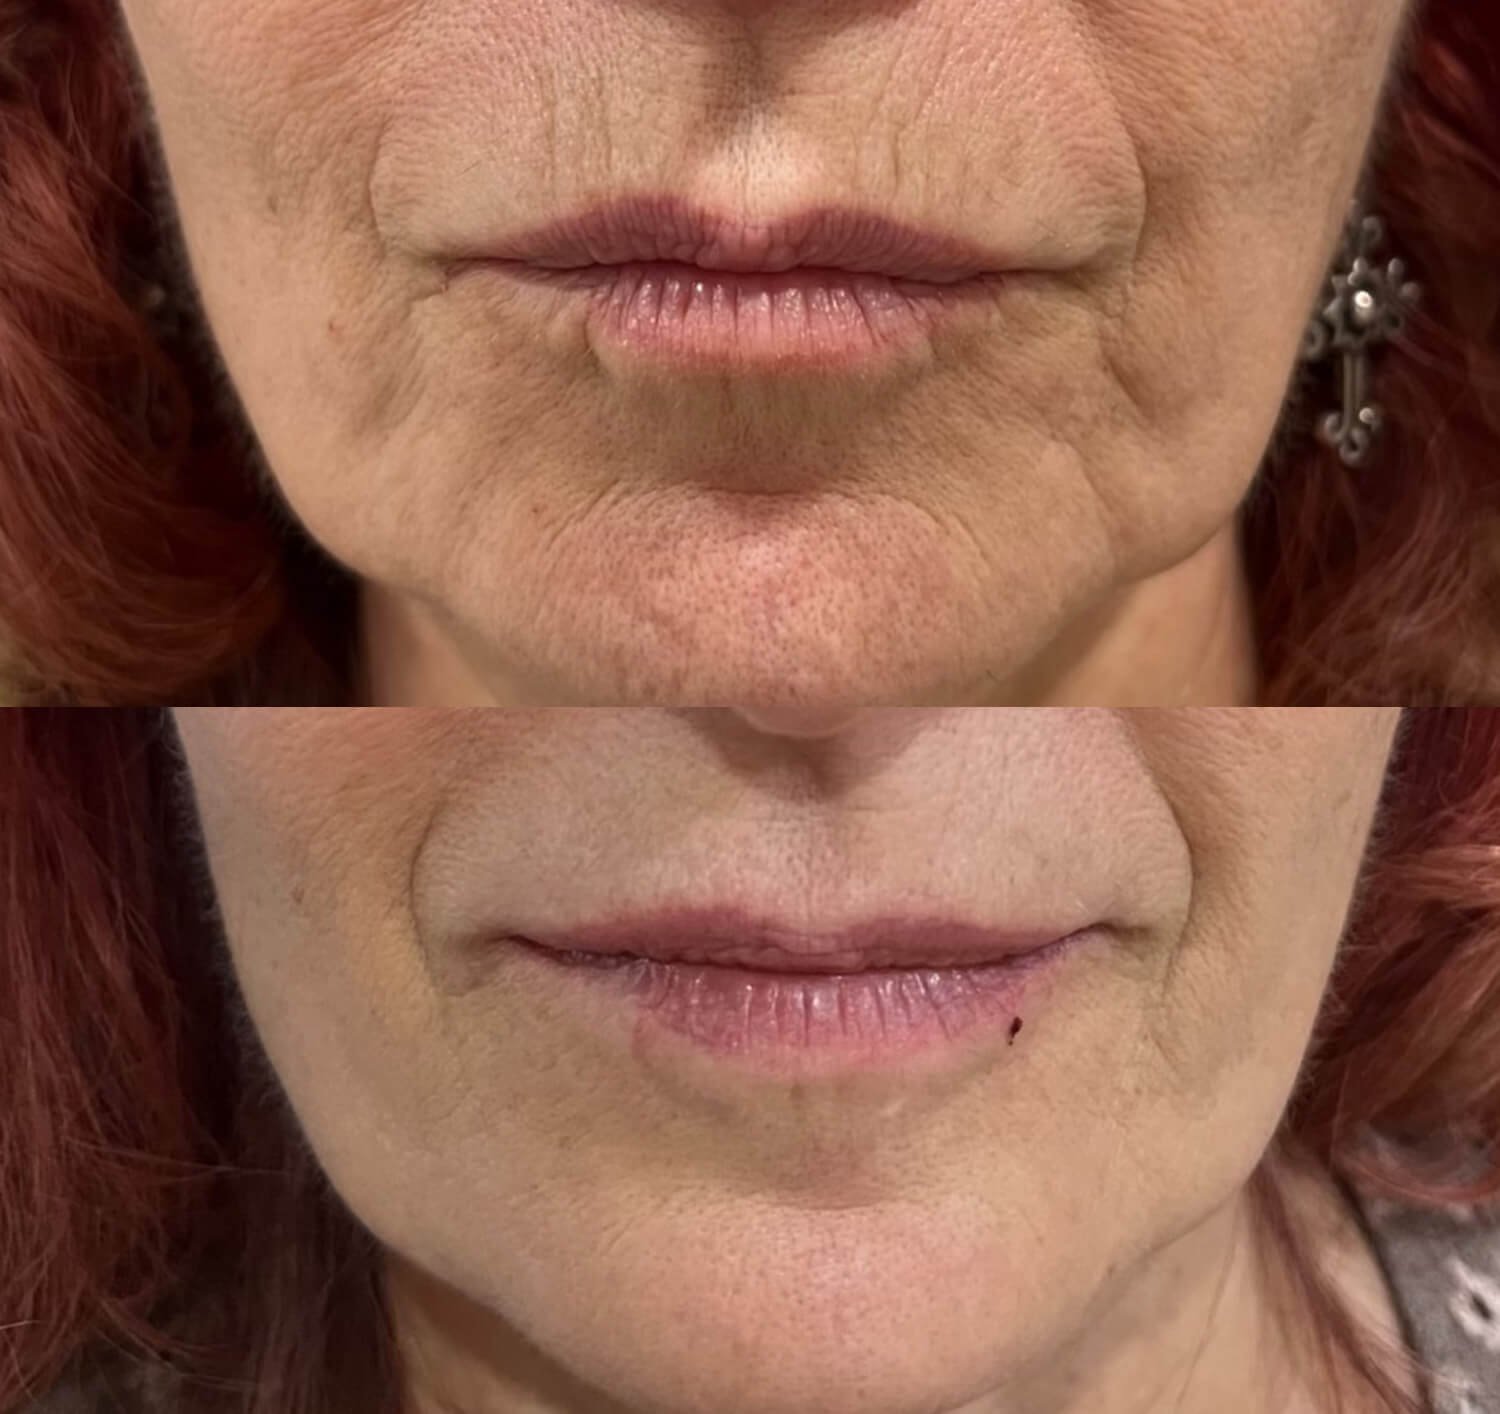 Christine Yanikian botox for laugh lines before and after.jpg